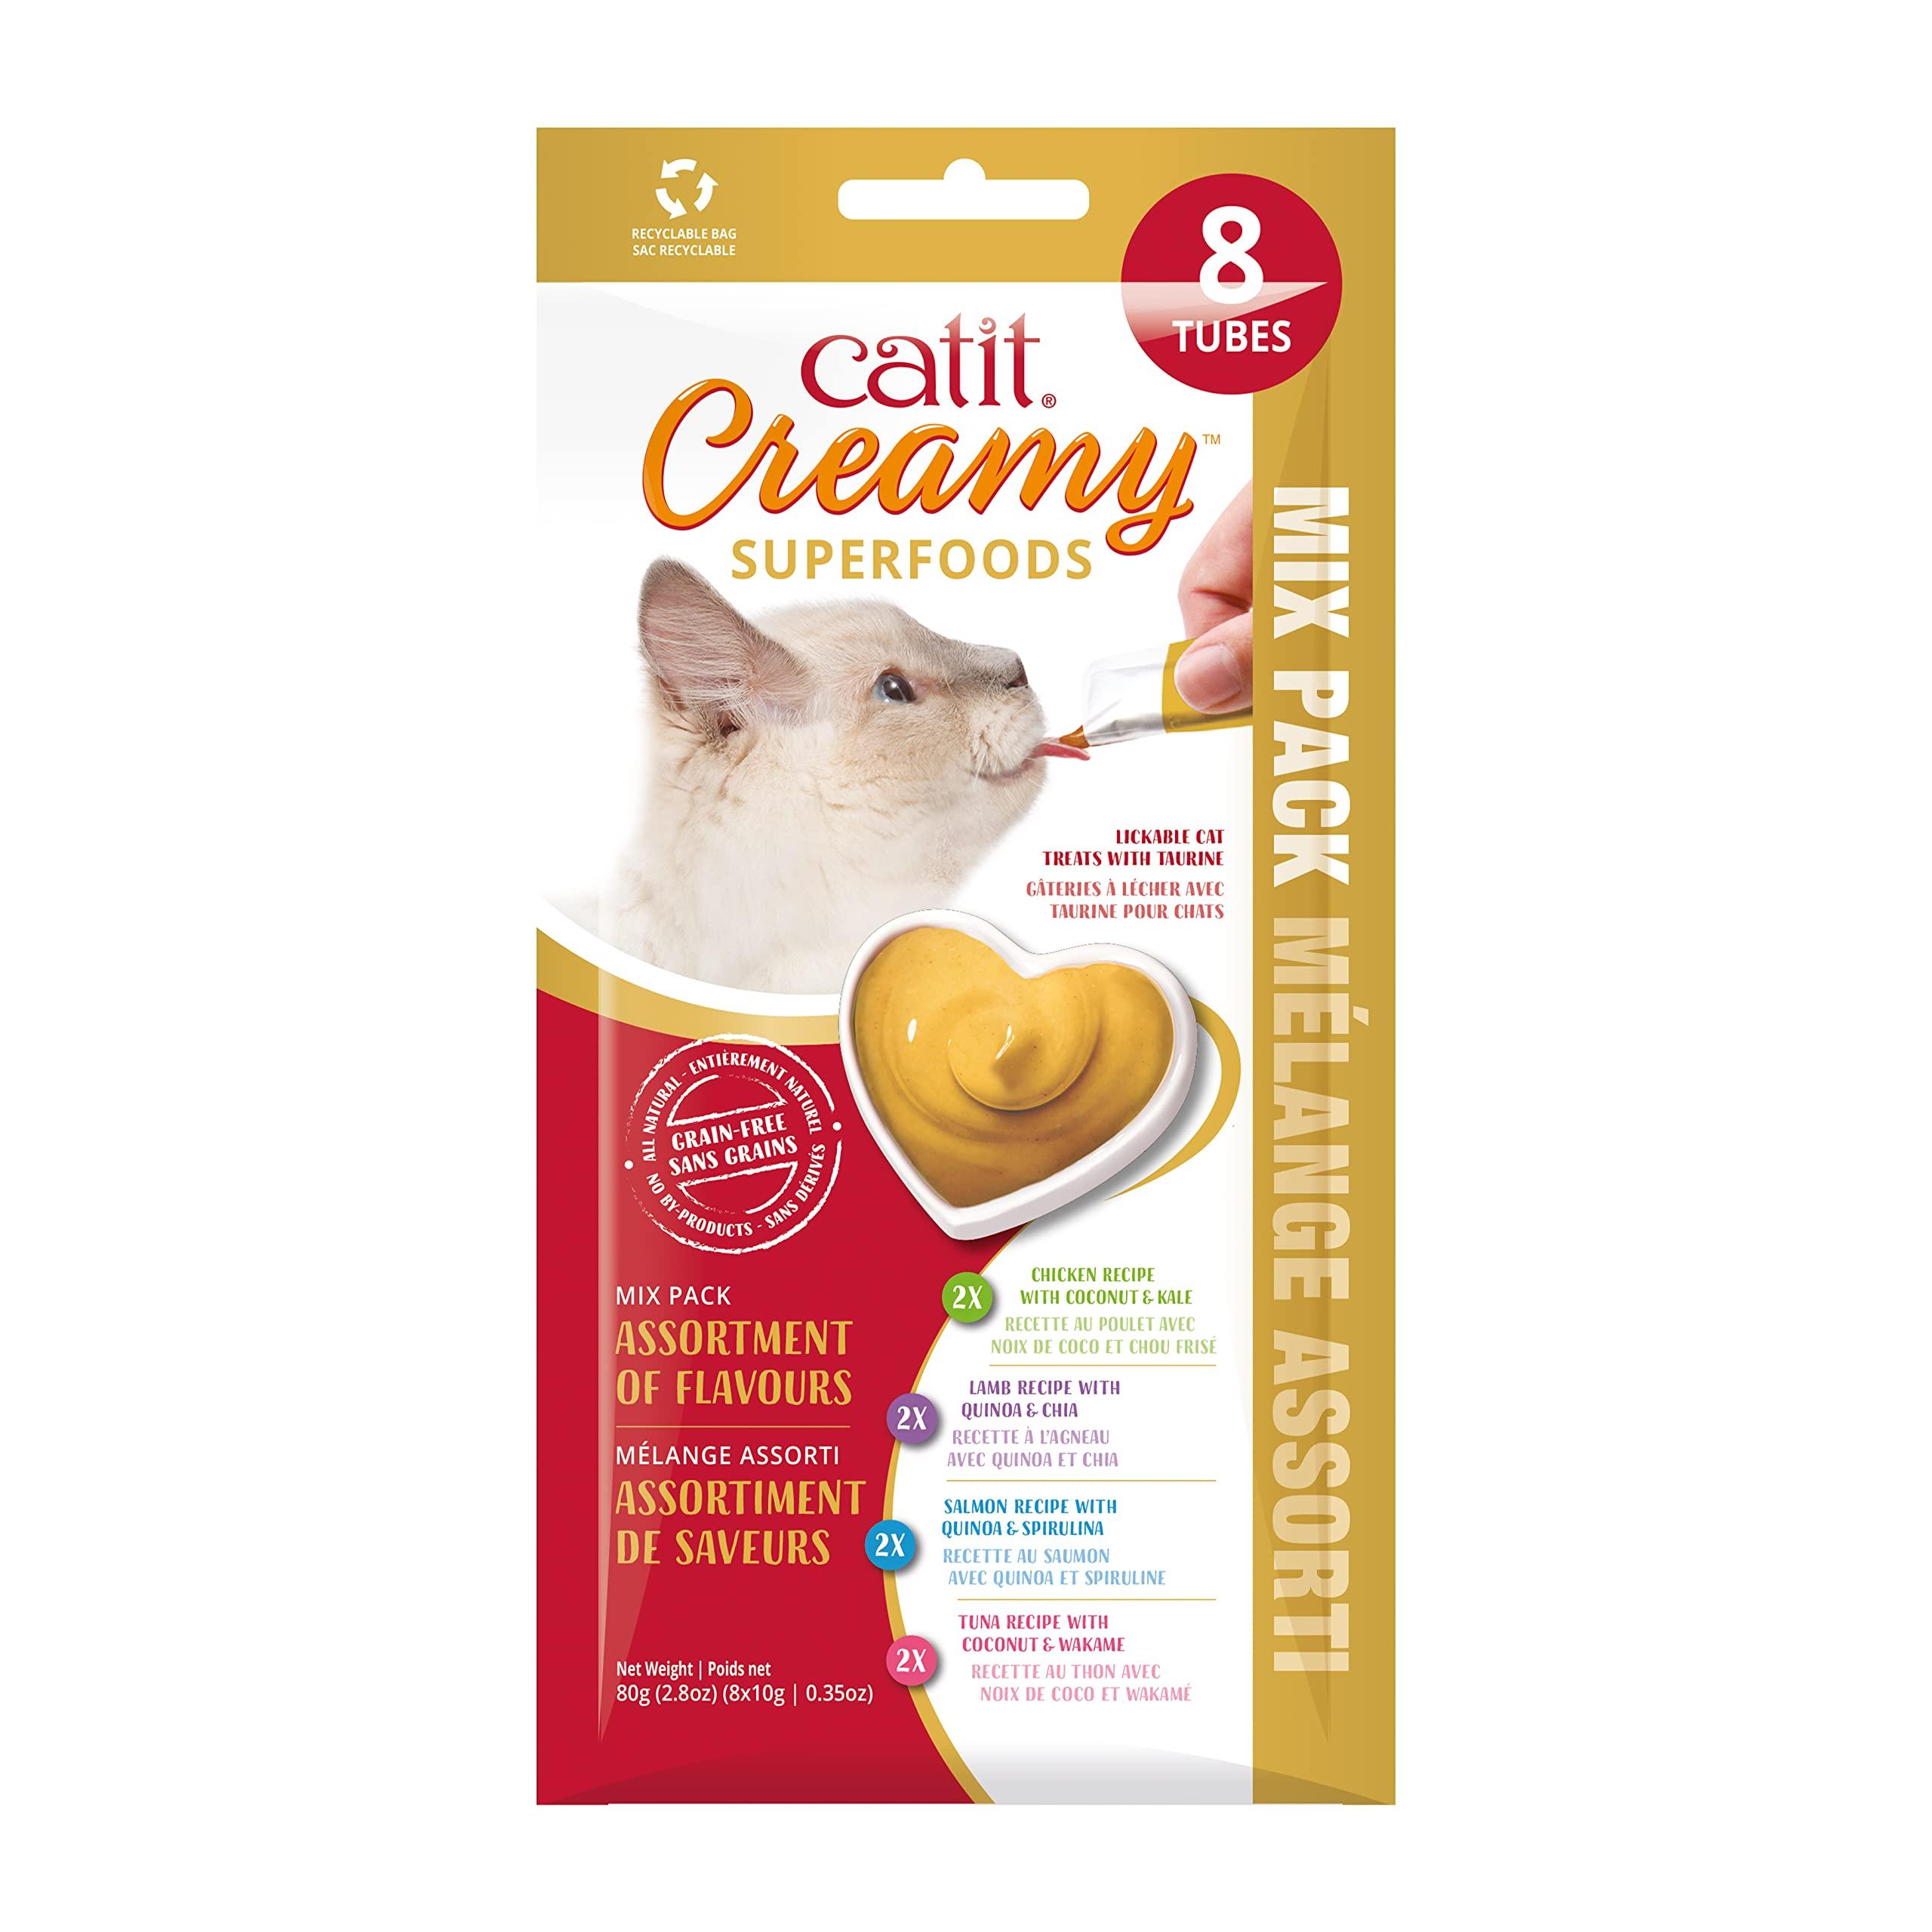 Catit Creamy Superfood Lickable Cat Treat - Hydrating and Healthy Treat for Cats of All Ages - Assortment, 8-Pack